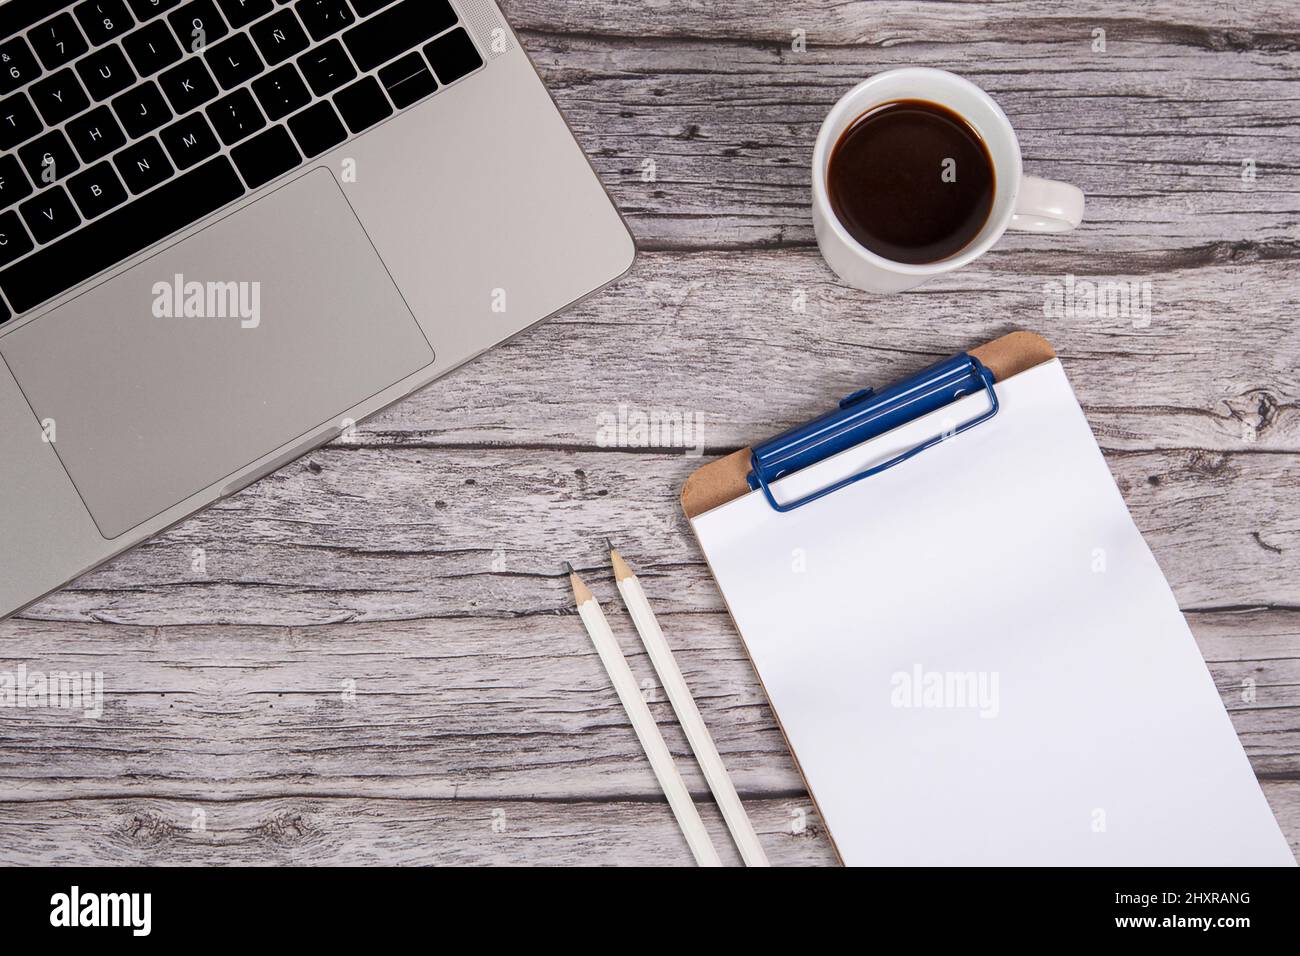 Office desk with smartphone, laptop and cup of coffee. Top view with copy space. Stock Photo